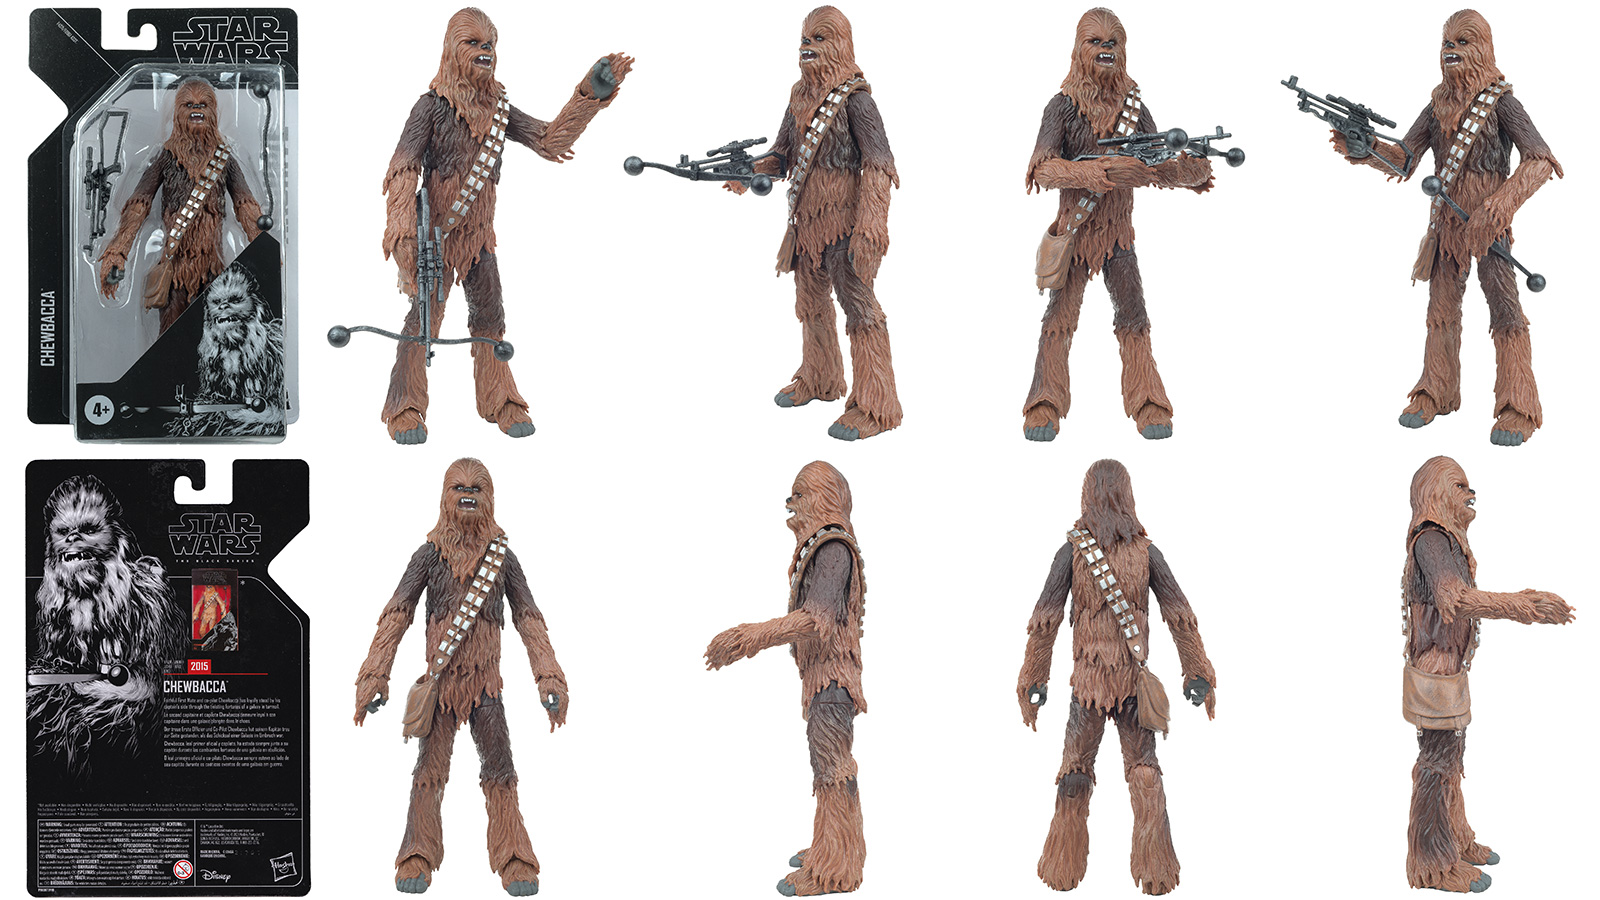 New Photos - The Black Series Archive 6-Inch: Chewbacca (A New Hope)